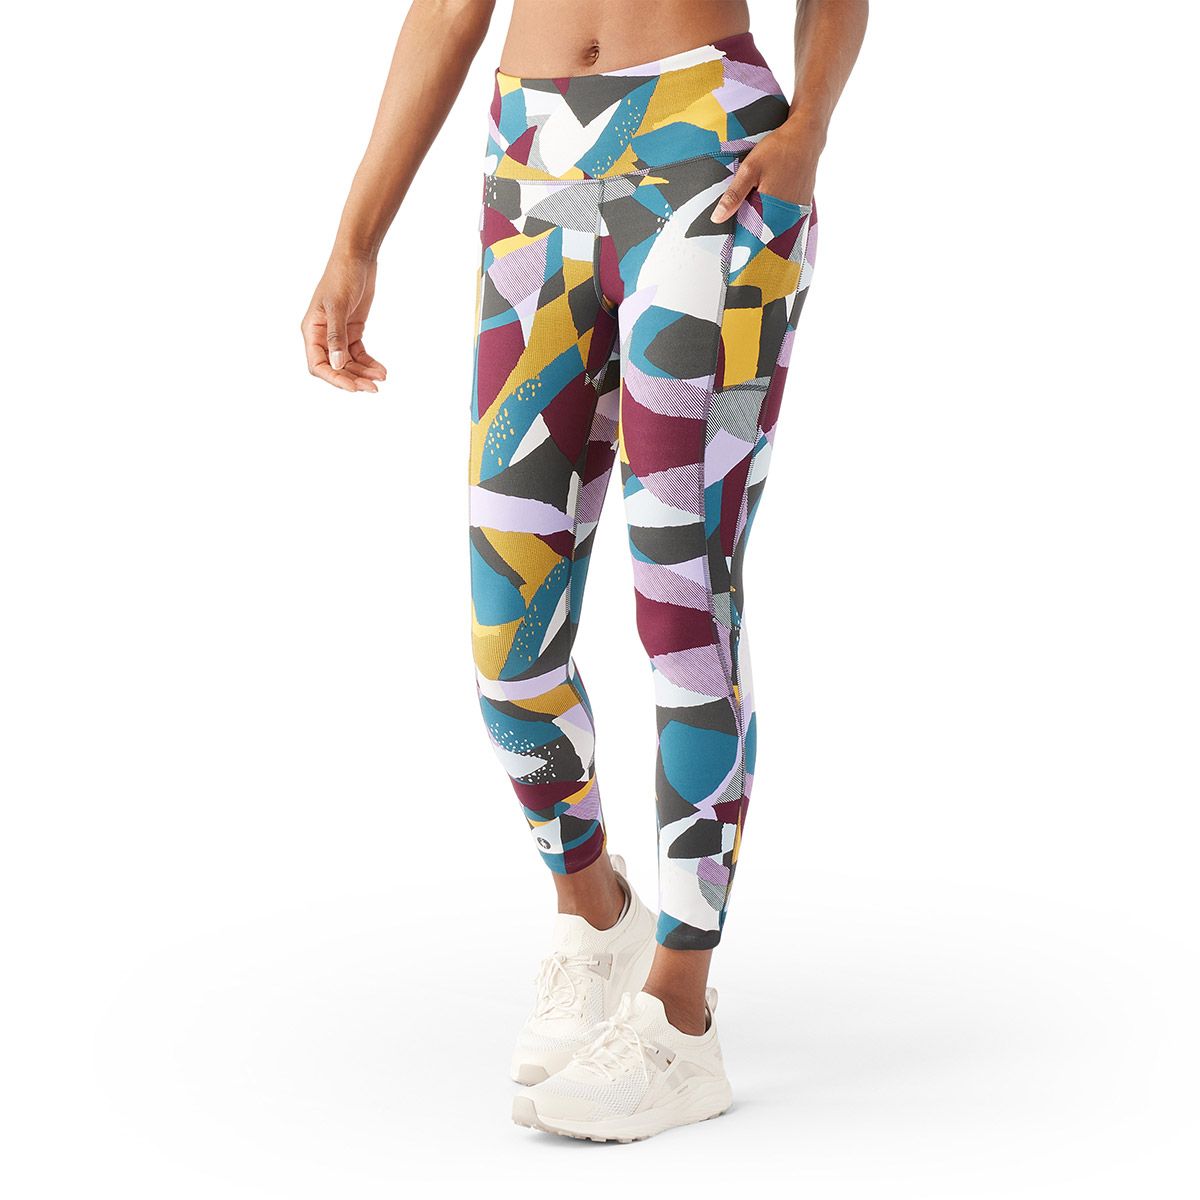 Soft Touch Side Pocket 7/8 Legging - Cloud – Dharma Bums Yoga and Activewear